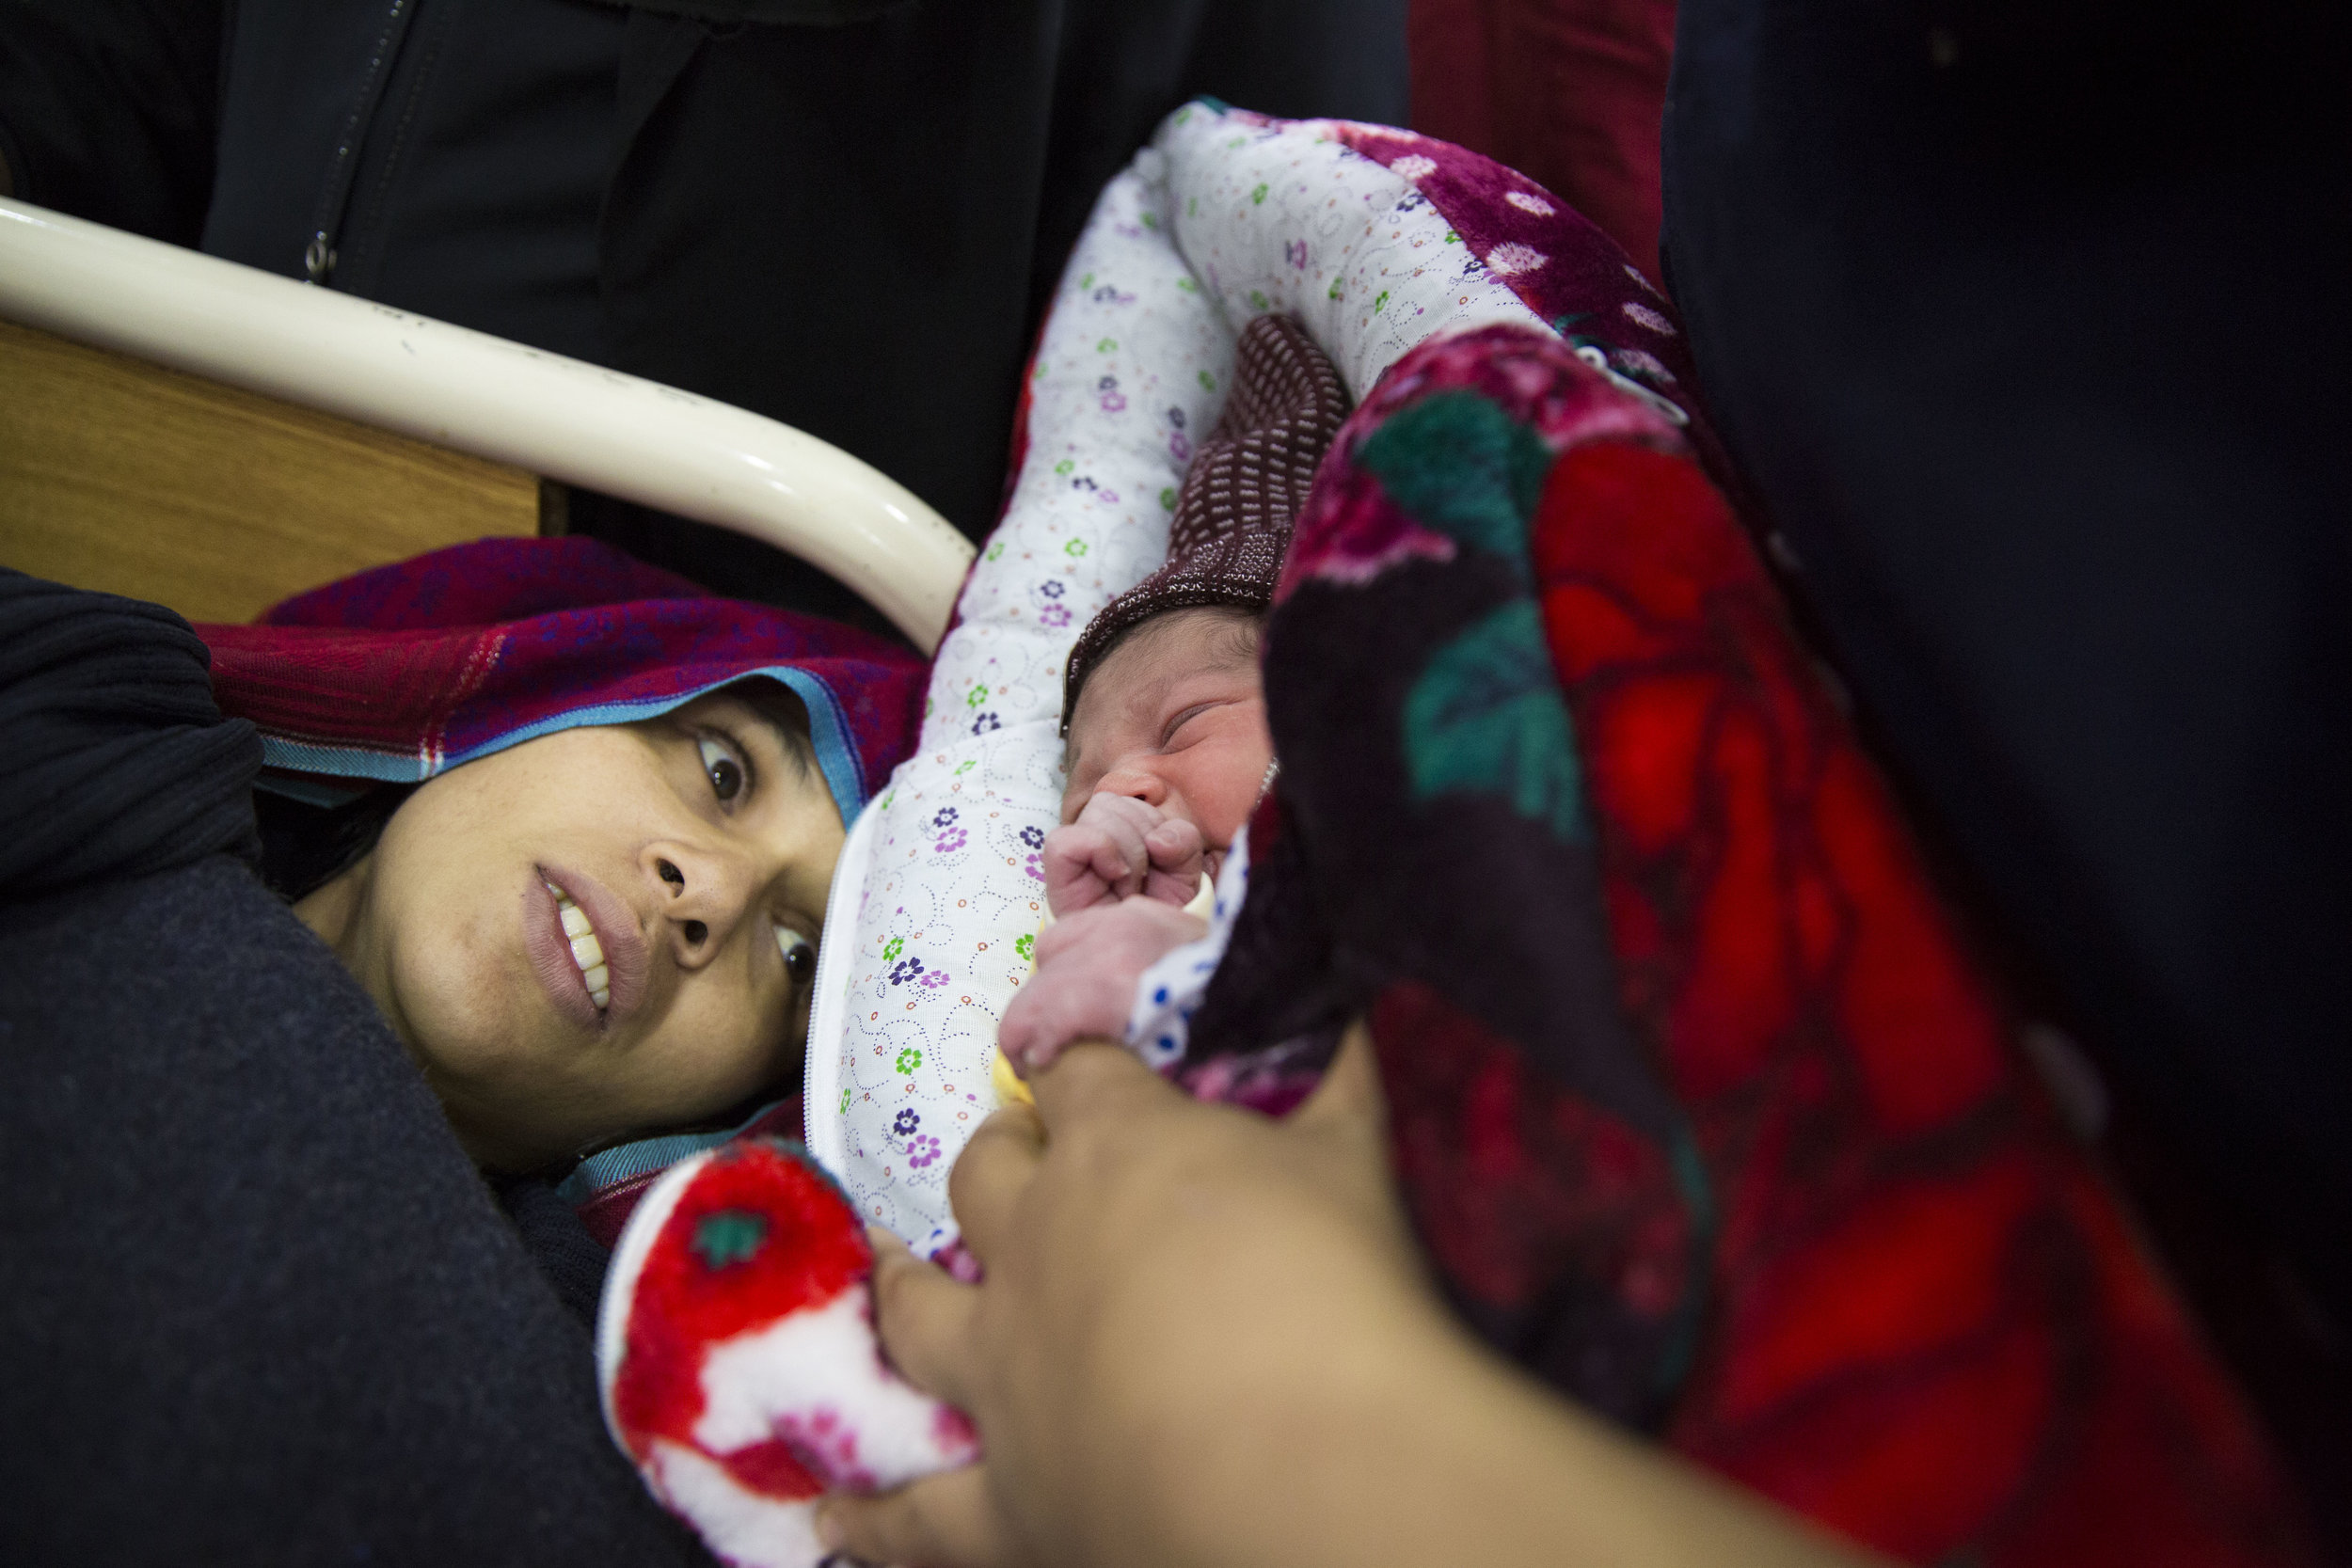  Sobia Sajid's meets her newborn baby at the high-risk postnatal ward after suffering from postpartum haemorrhaging during labour. 